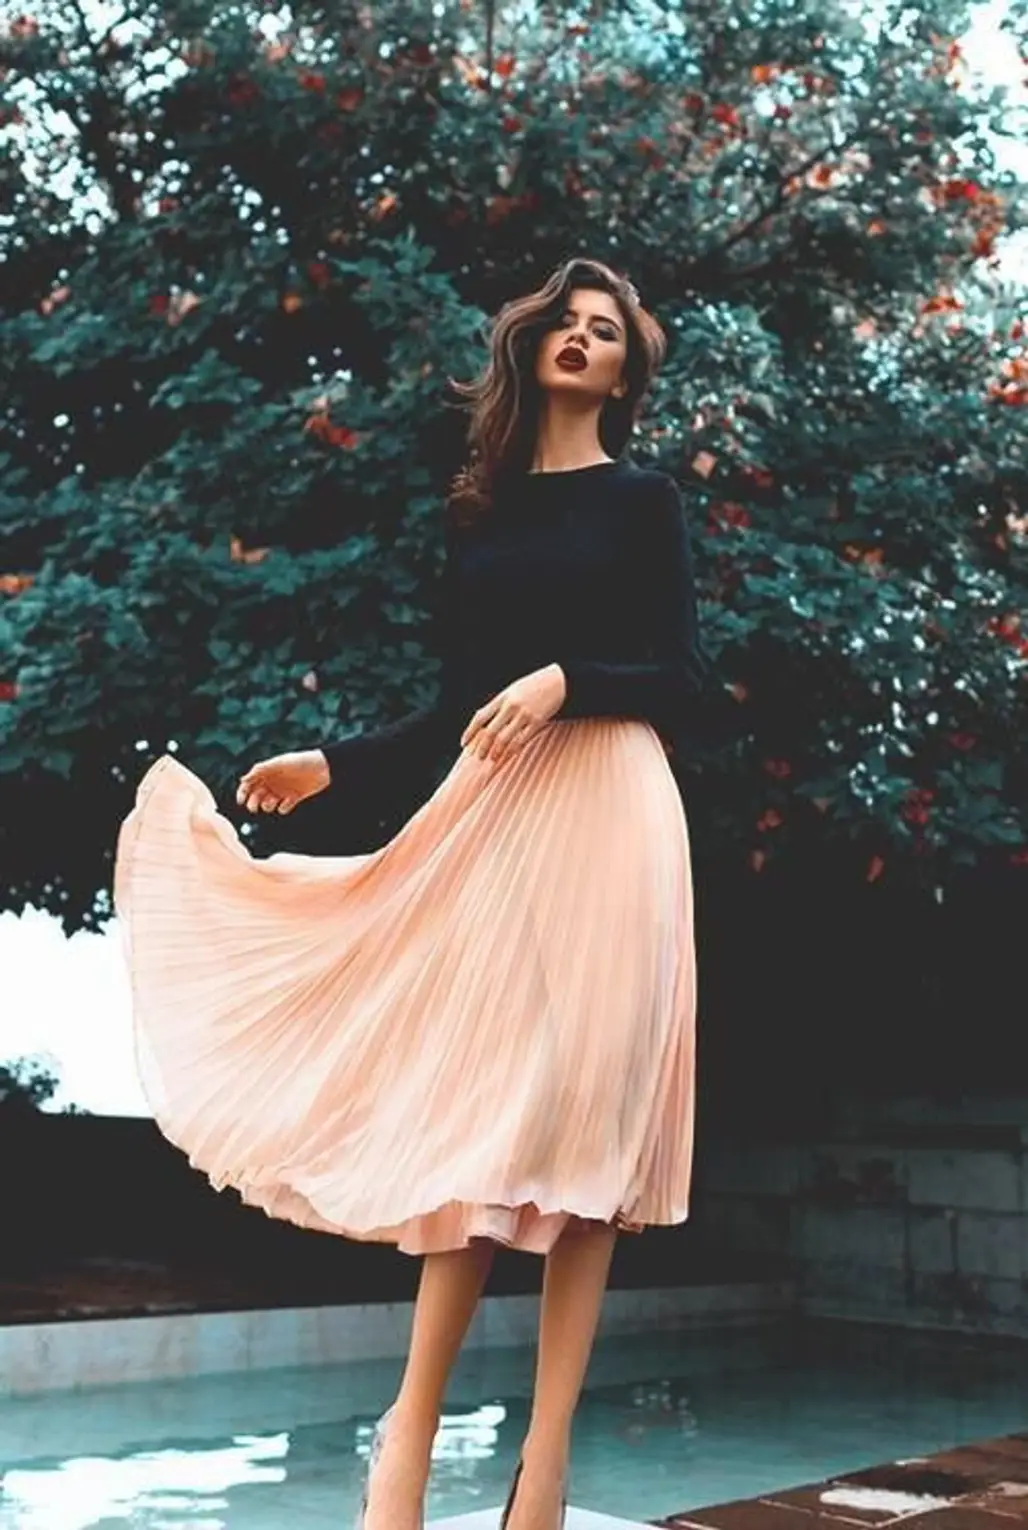 A Fitted Black Top and a Light Midi Skirt is the OTP, Hands down!